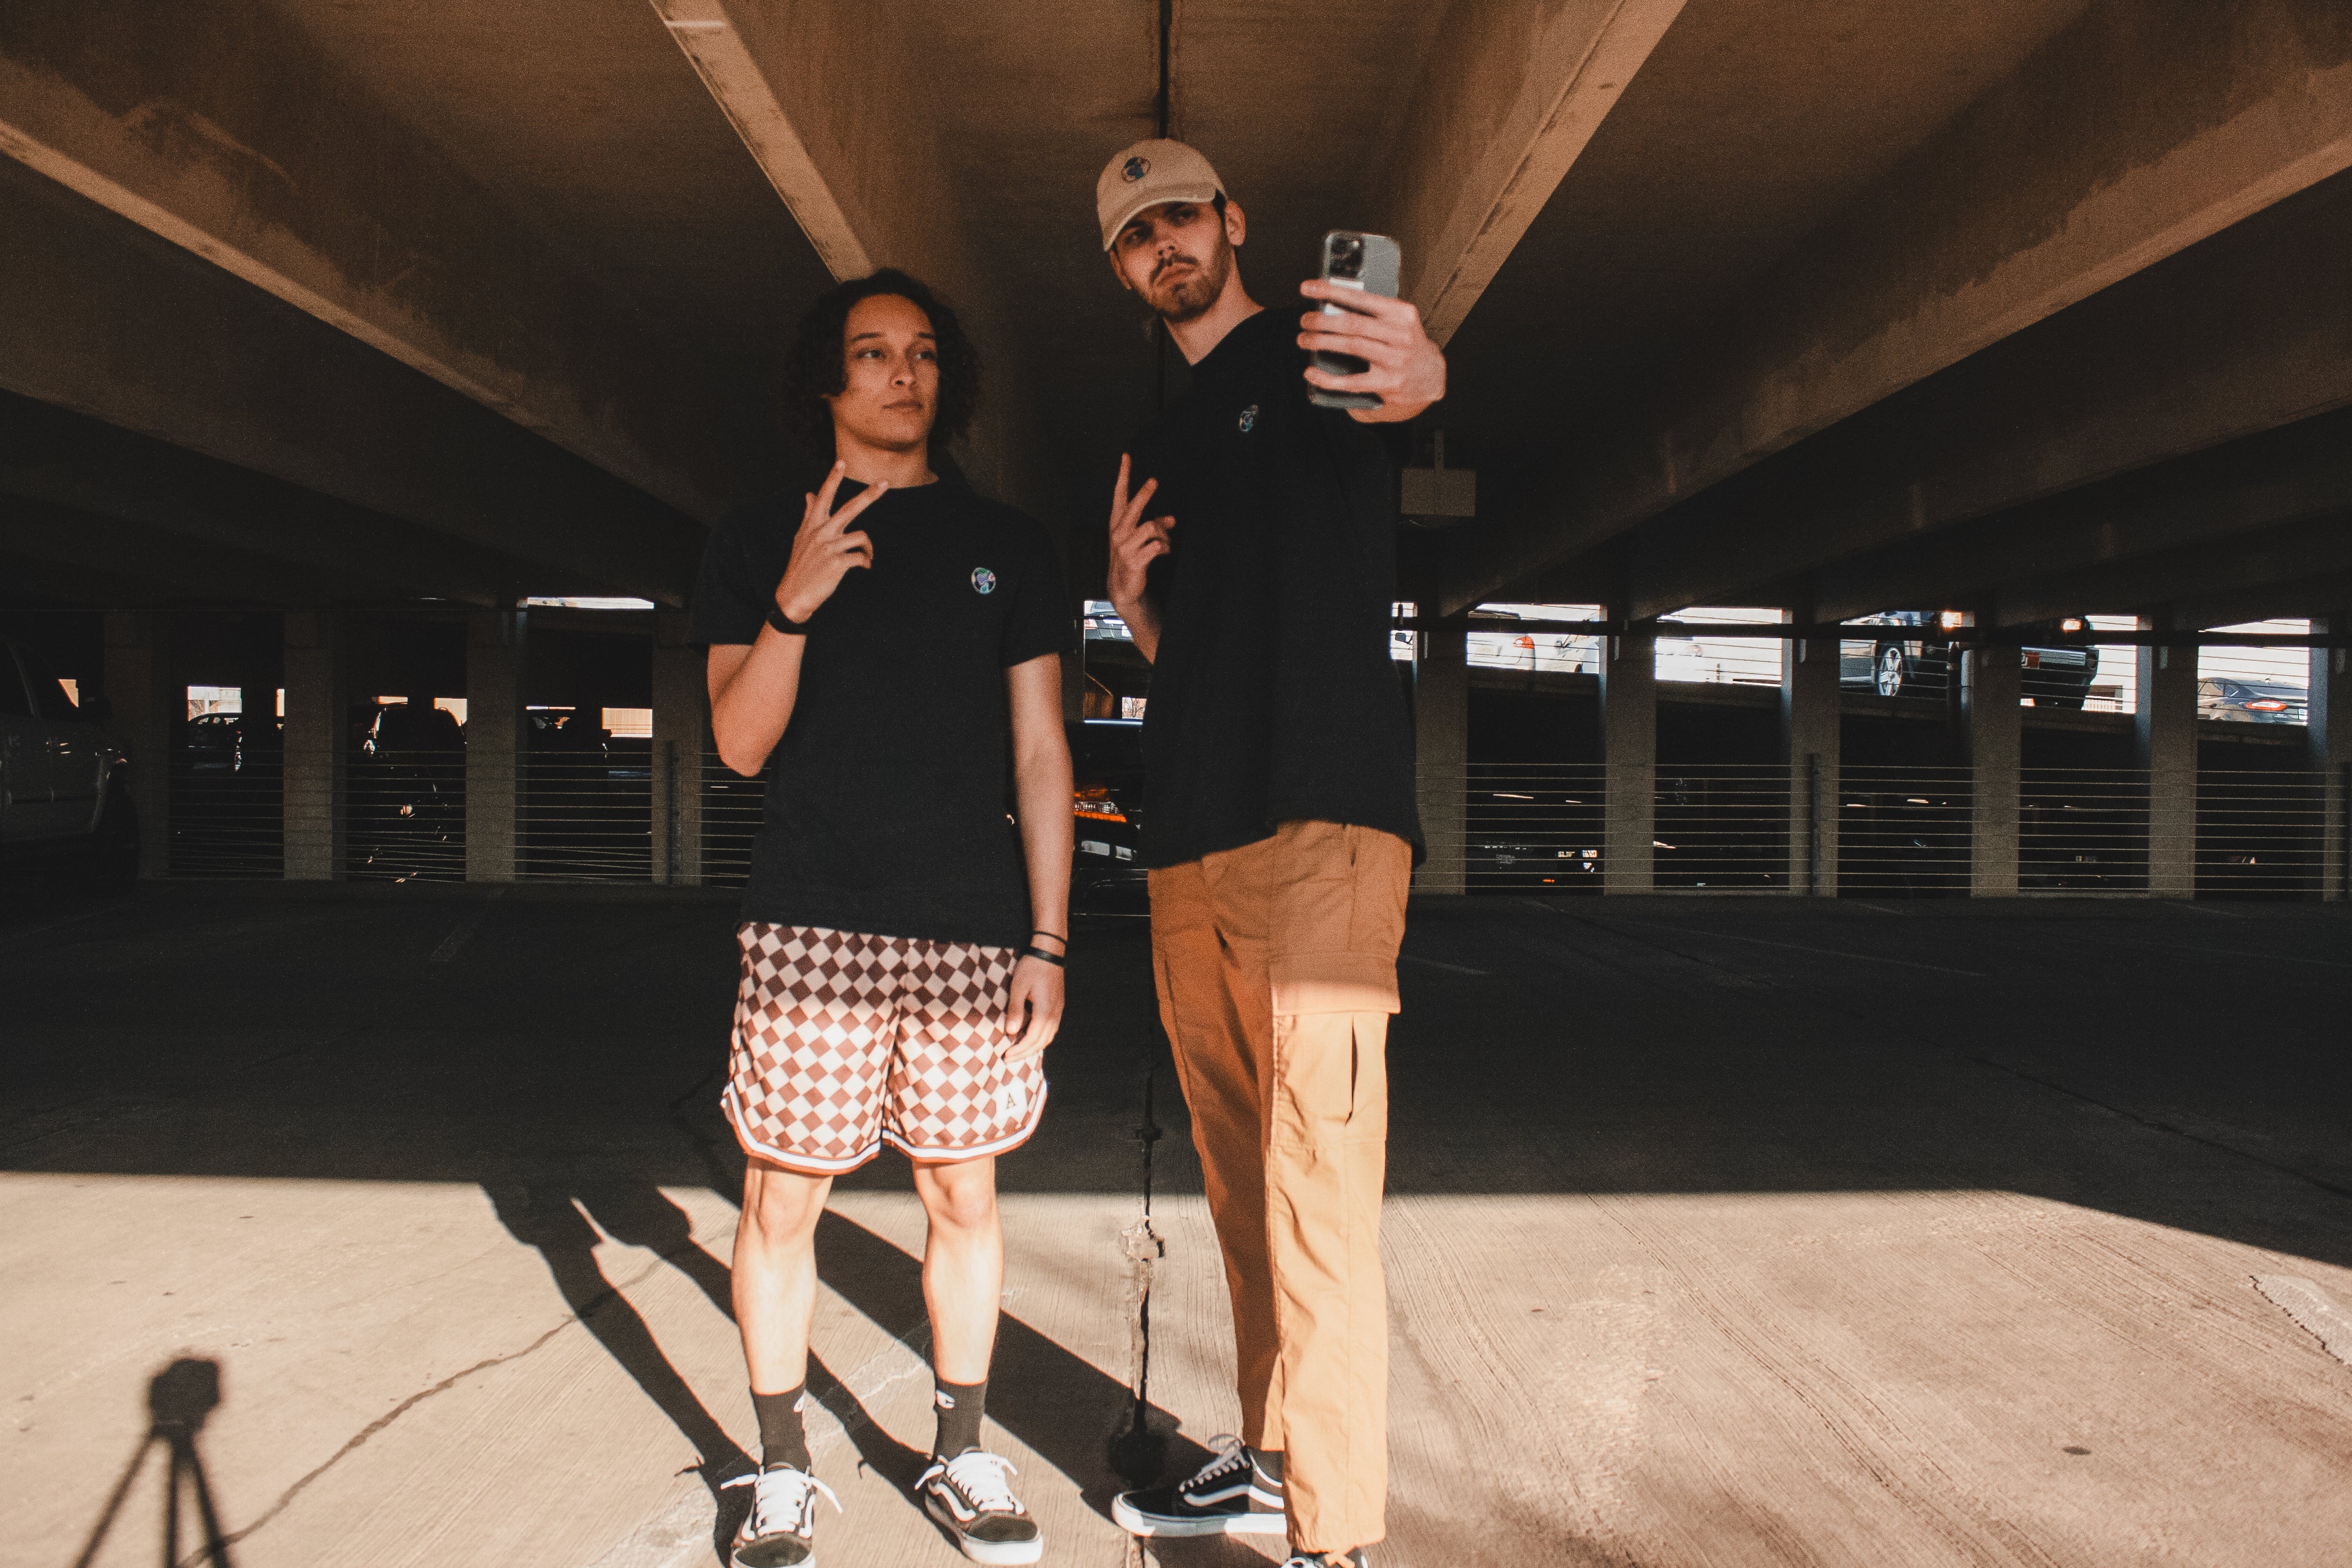 TruColours Apparel Embroidered T-Shirts being modeled by Aiden (left) and Blaine (right) in a parking garage. They are posing as if they are taking a selfie (Blaine holding the phone camera).